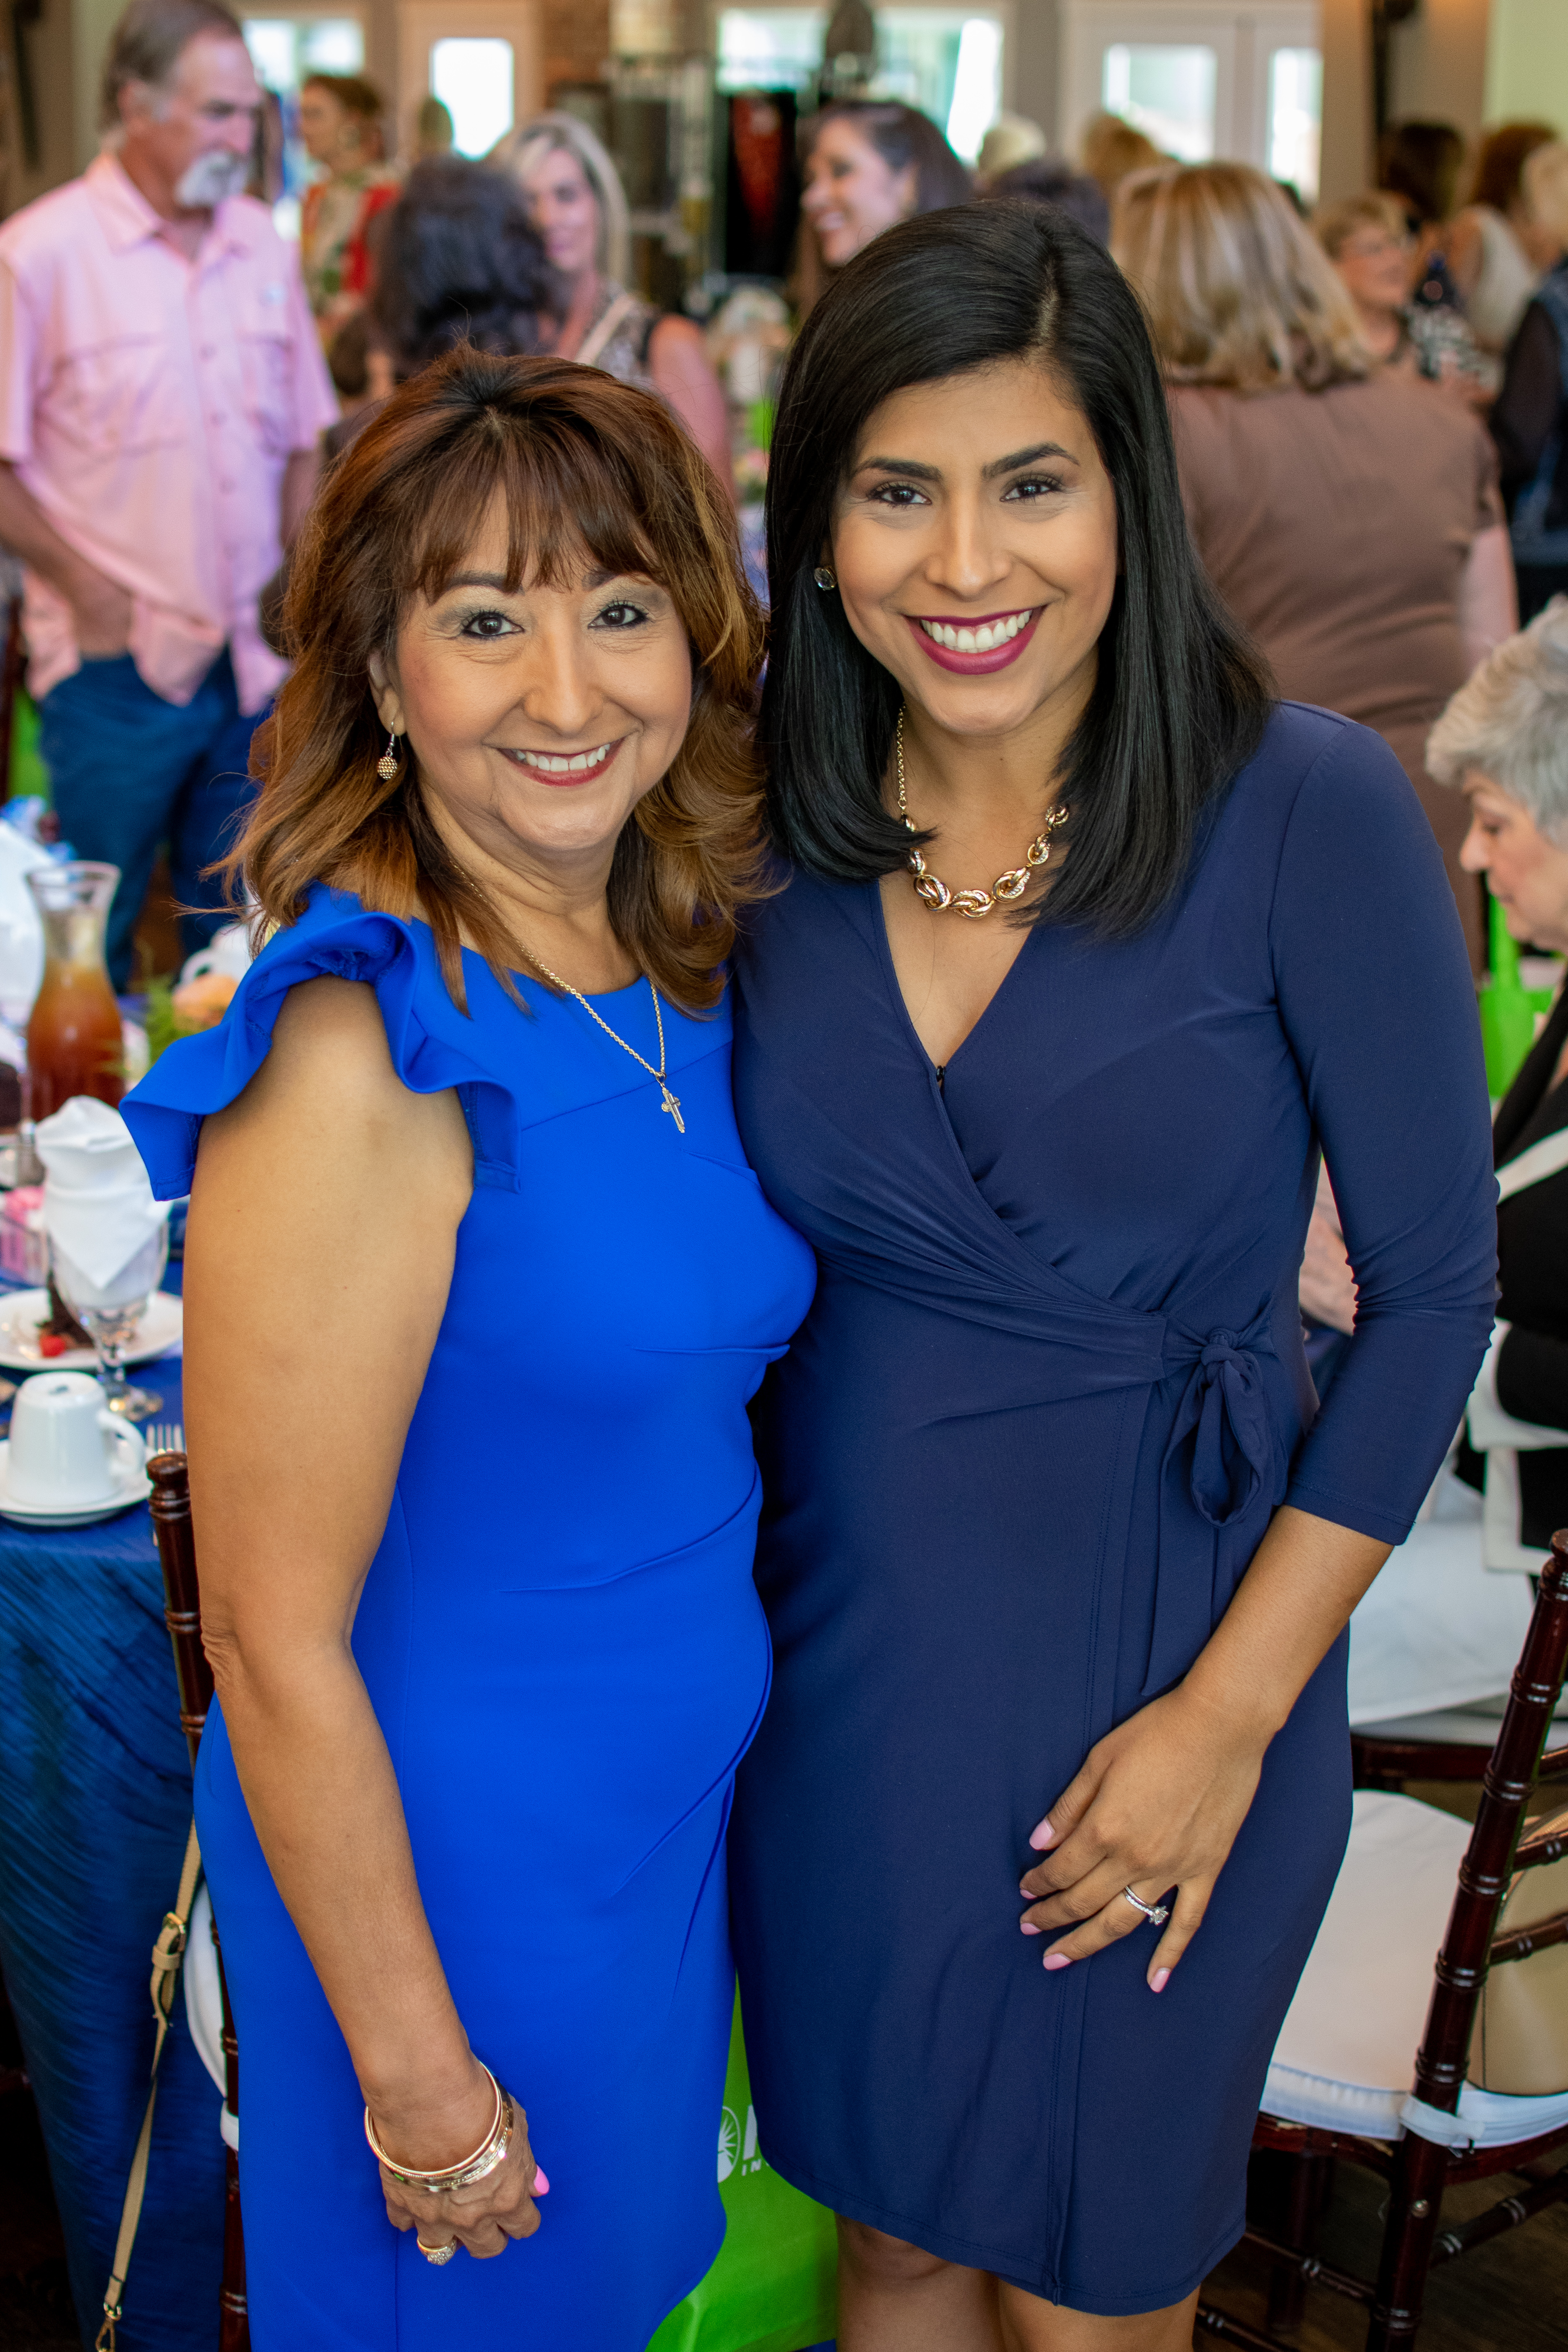 2019 Jeans & Jewels Luncheon Honors Donna Asbill and raises nearly $70,000